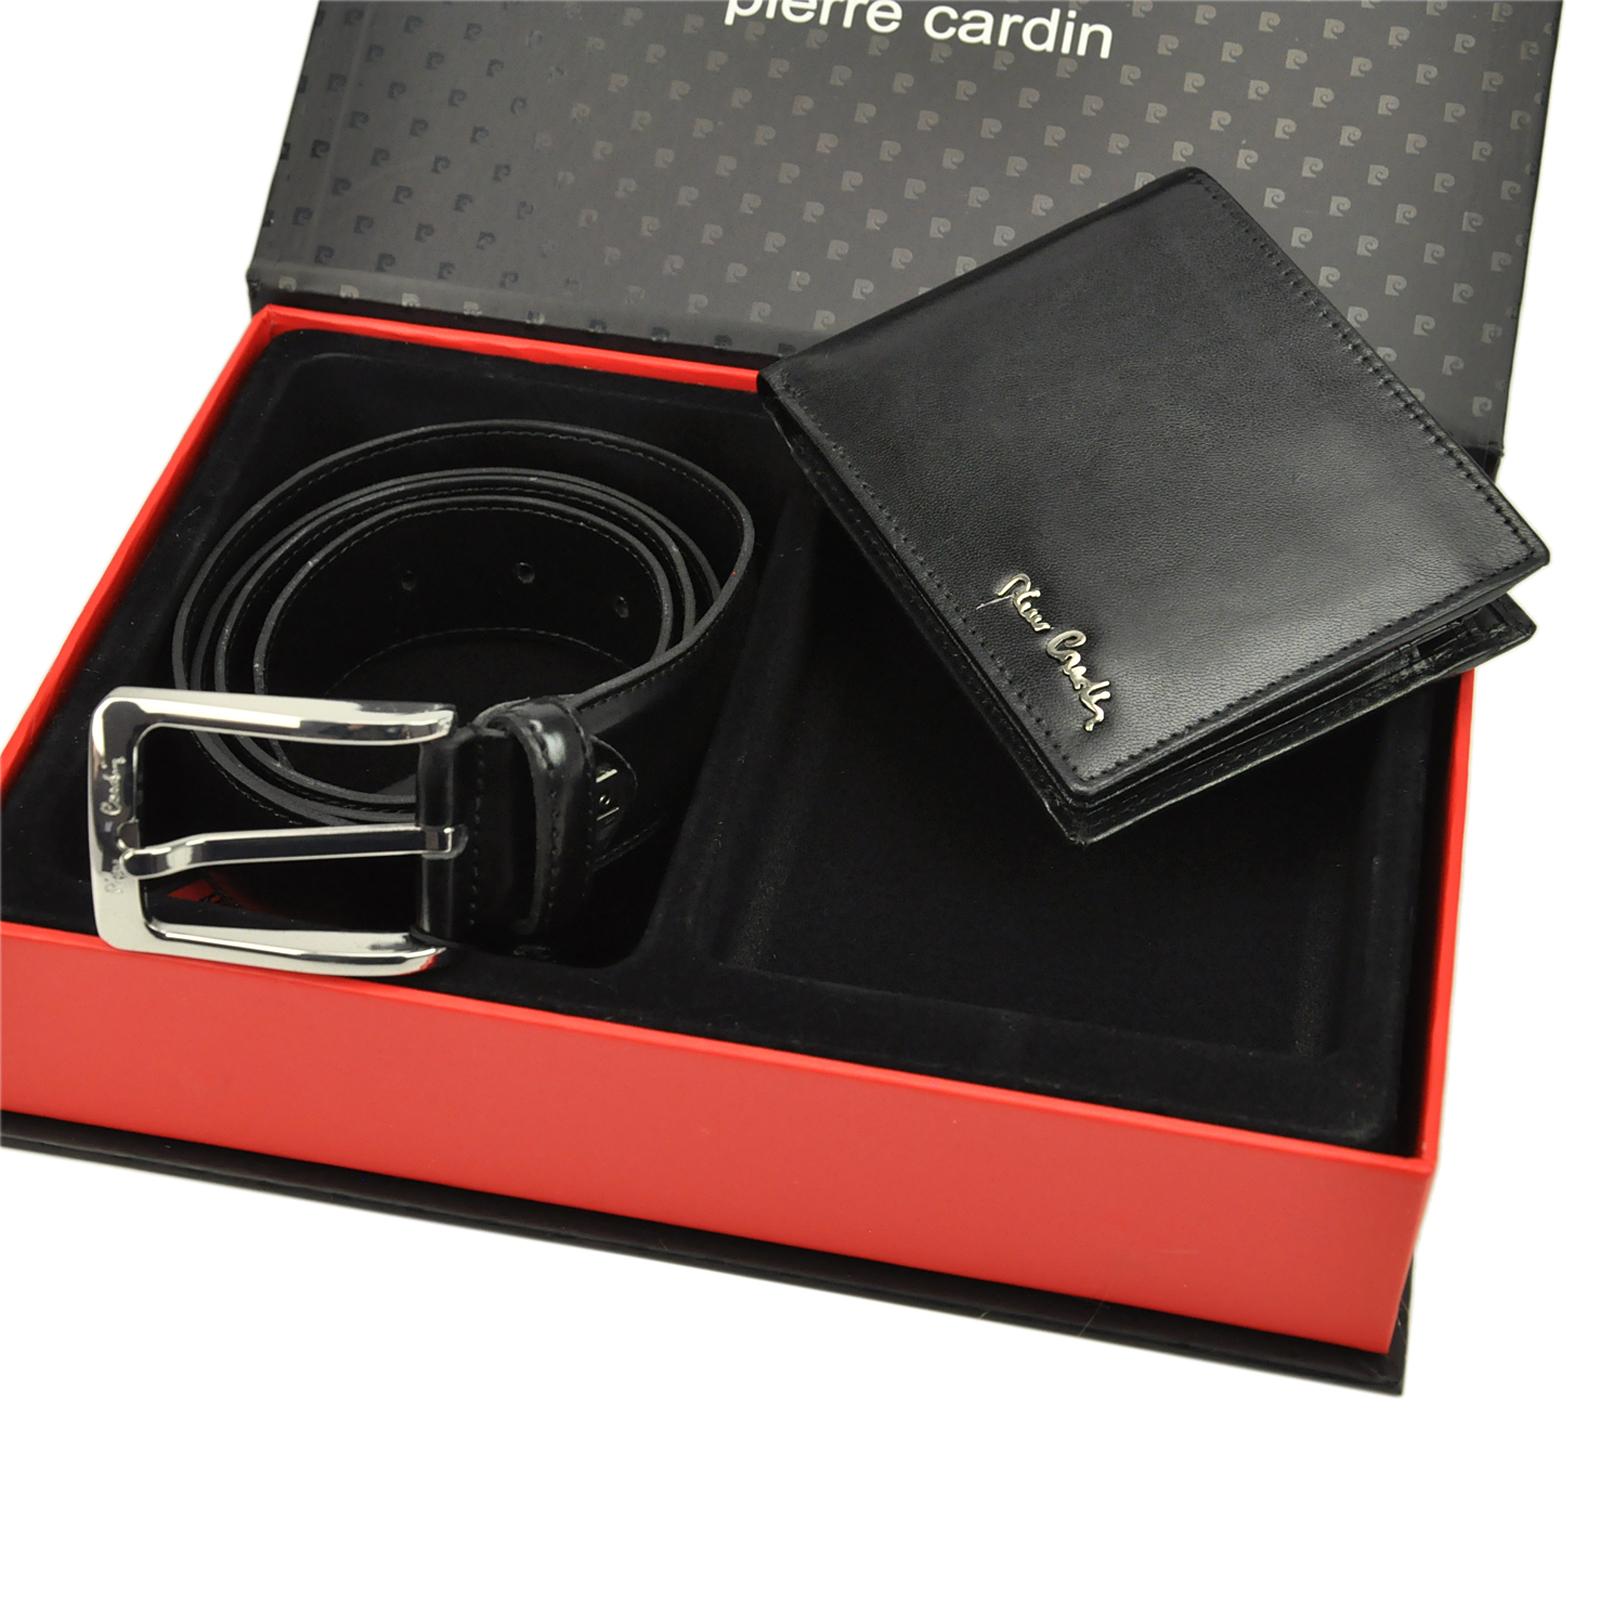 Pierre Cardin Man Leather Wallet with Leather Belt 115cm Gift Set – ZG ...